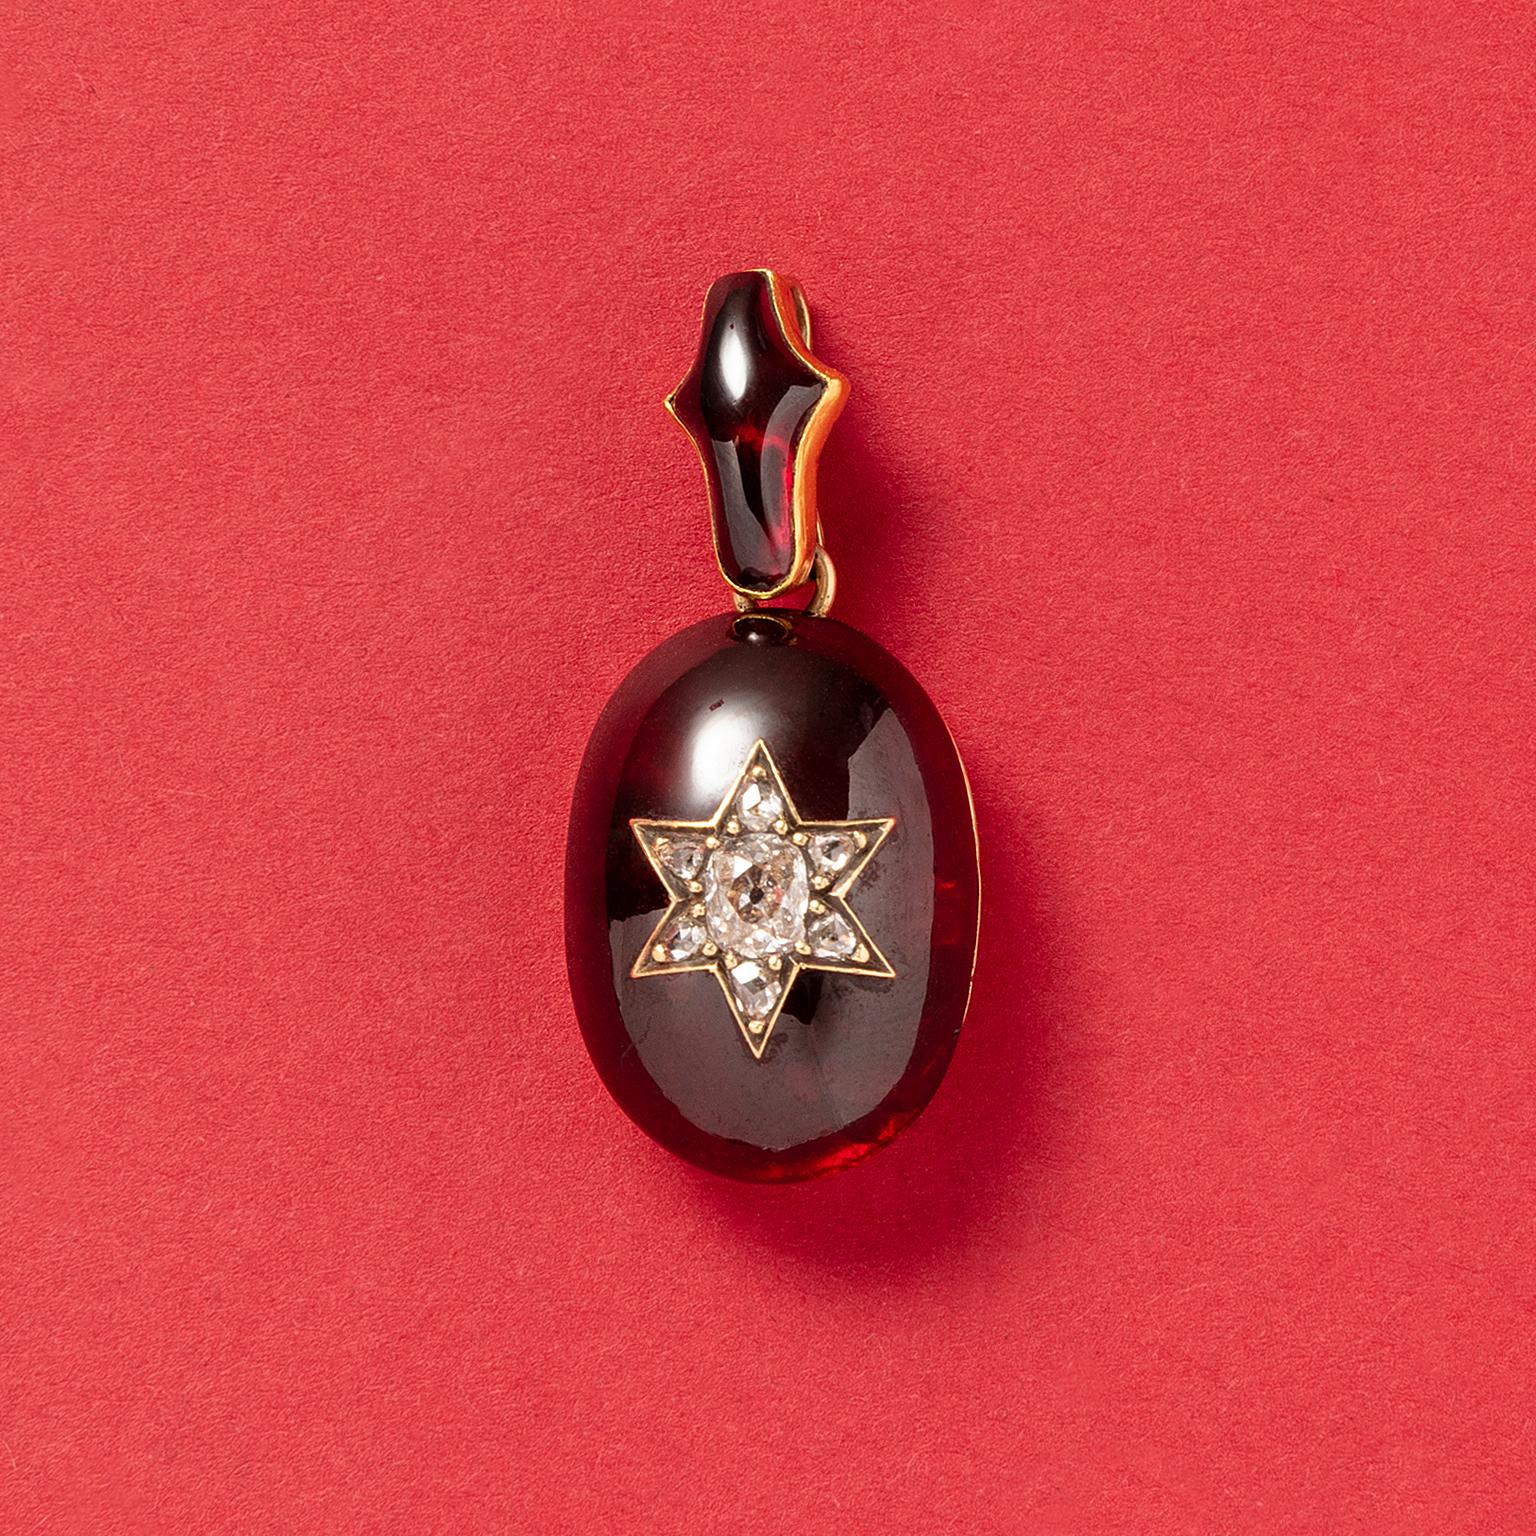 A 15 carat gold Victorian oval pendant set with a large deep red carbuncle garnet incrusted with a six pointed star at the centre set with a large cushion cut diamond surrounded by six rose cuts diamonds. The bail is also set with a matching garnet,